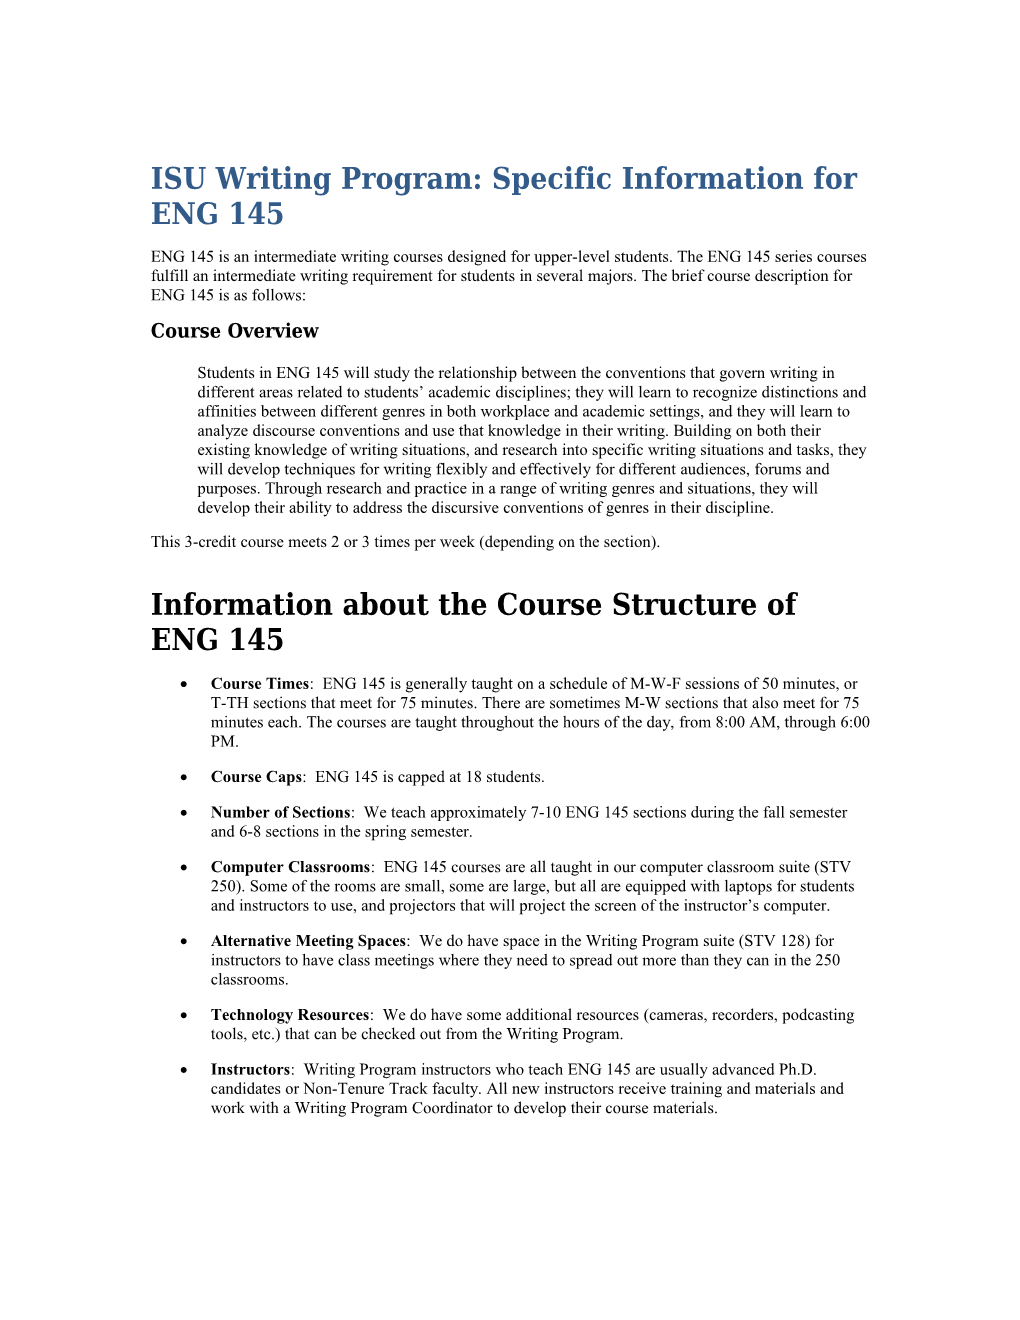 ISU Writing Program: Specific Information for ENG 145